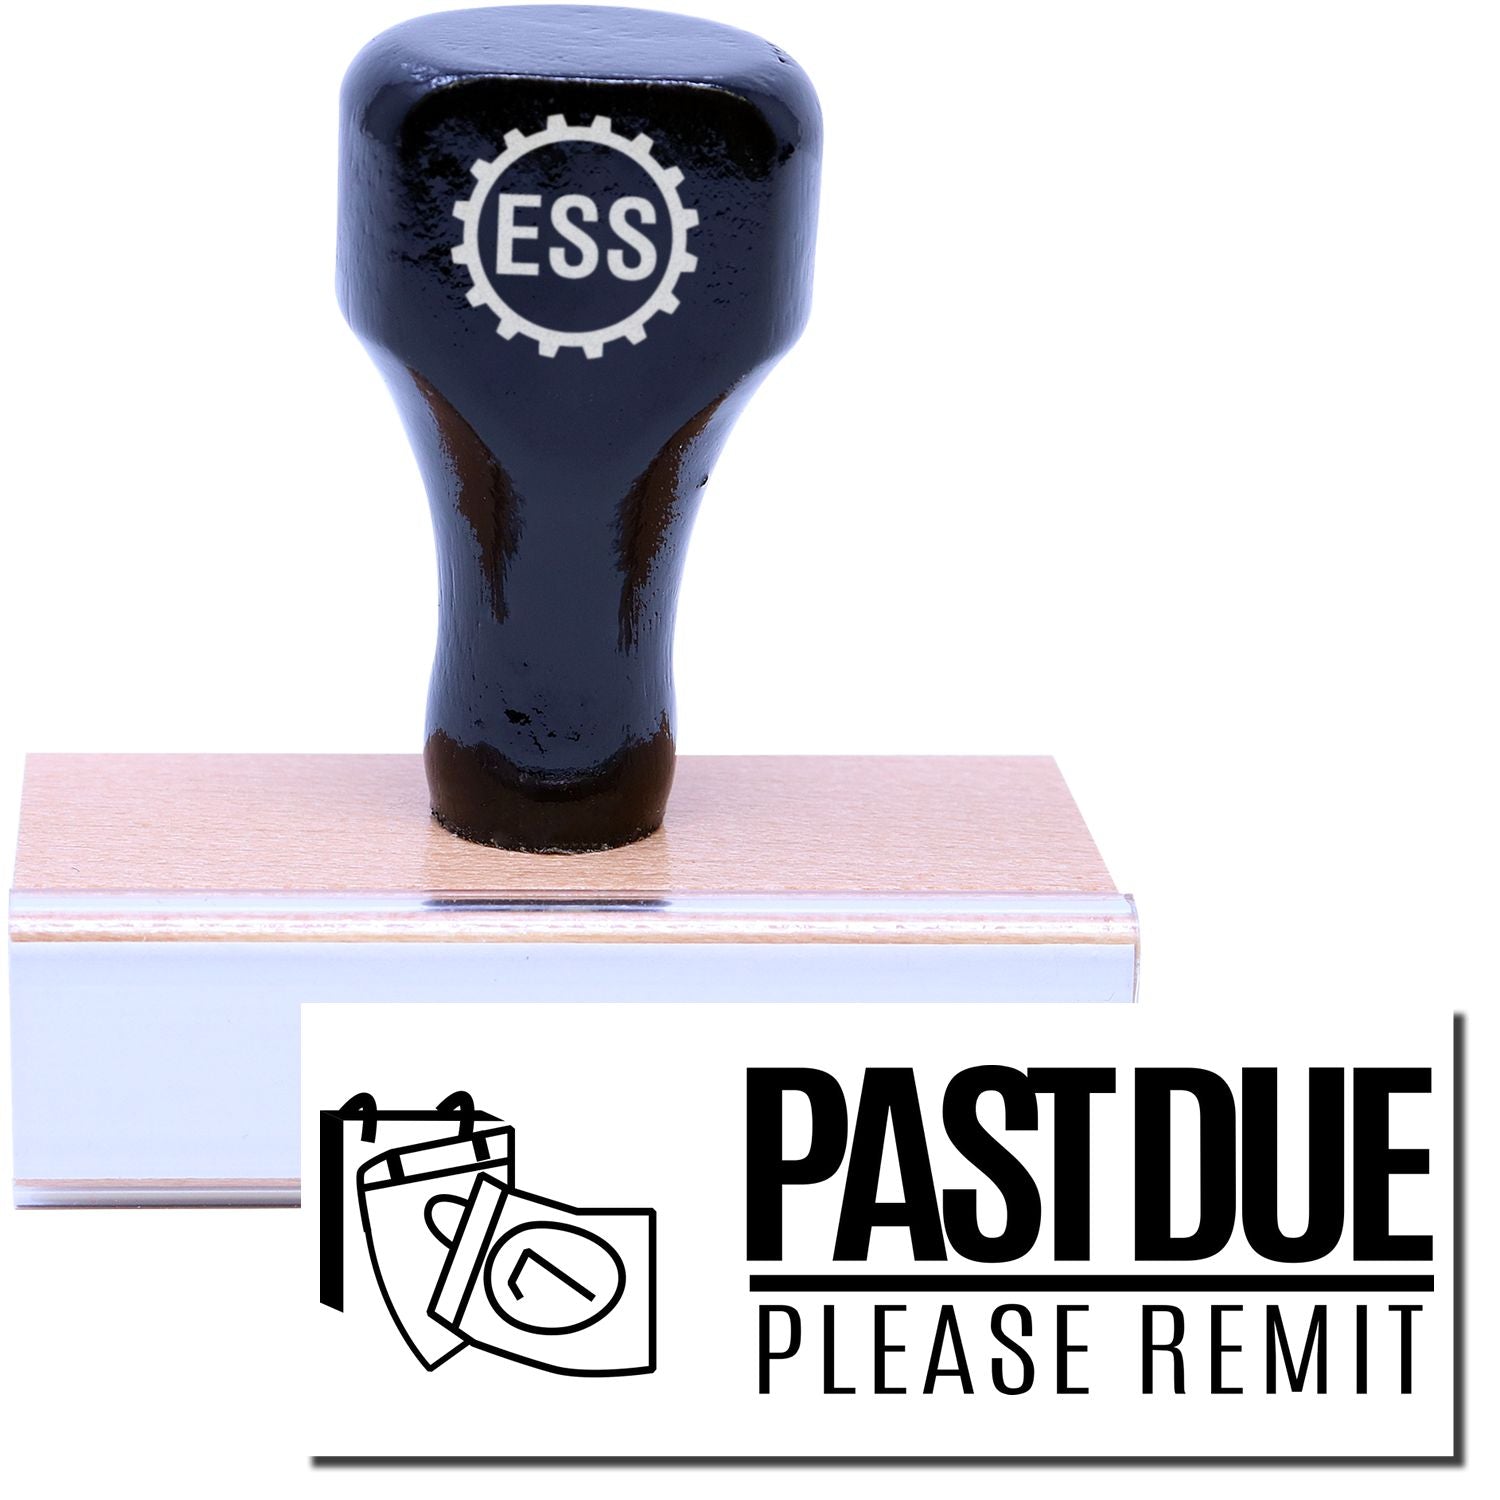 A stock office rubber stamp with a stamped image showing how the text "PAST DUE" in a large bold font (with a line underneath the text) and "PLEASE REMIT" (under a line) in a small font with an icon of a calendar on the left side is displayed after stamping.